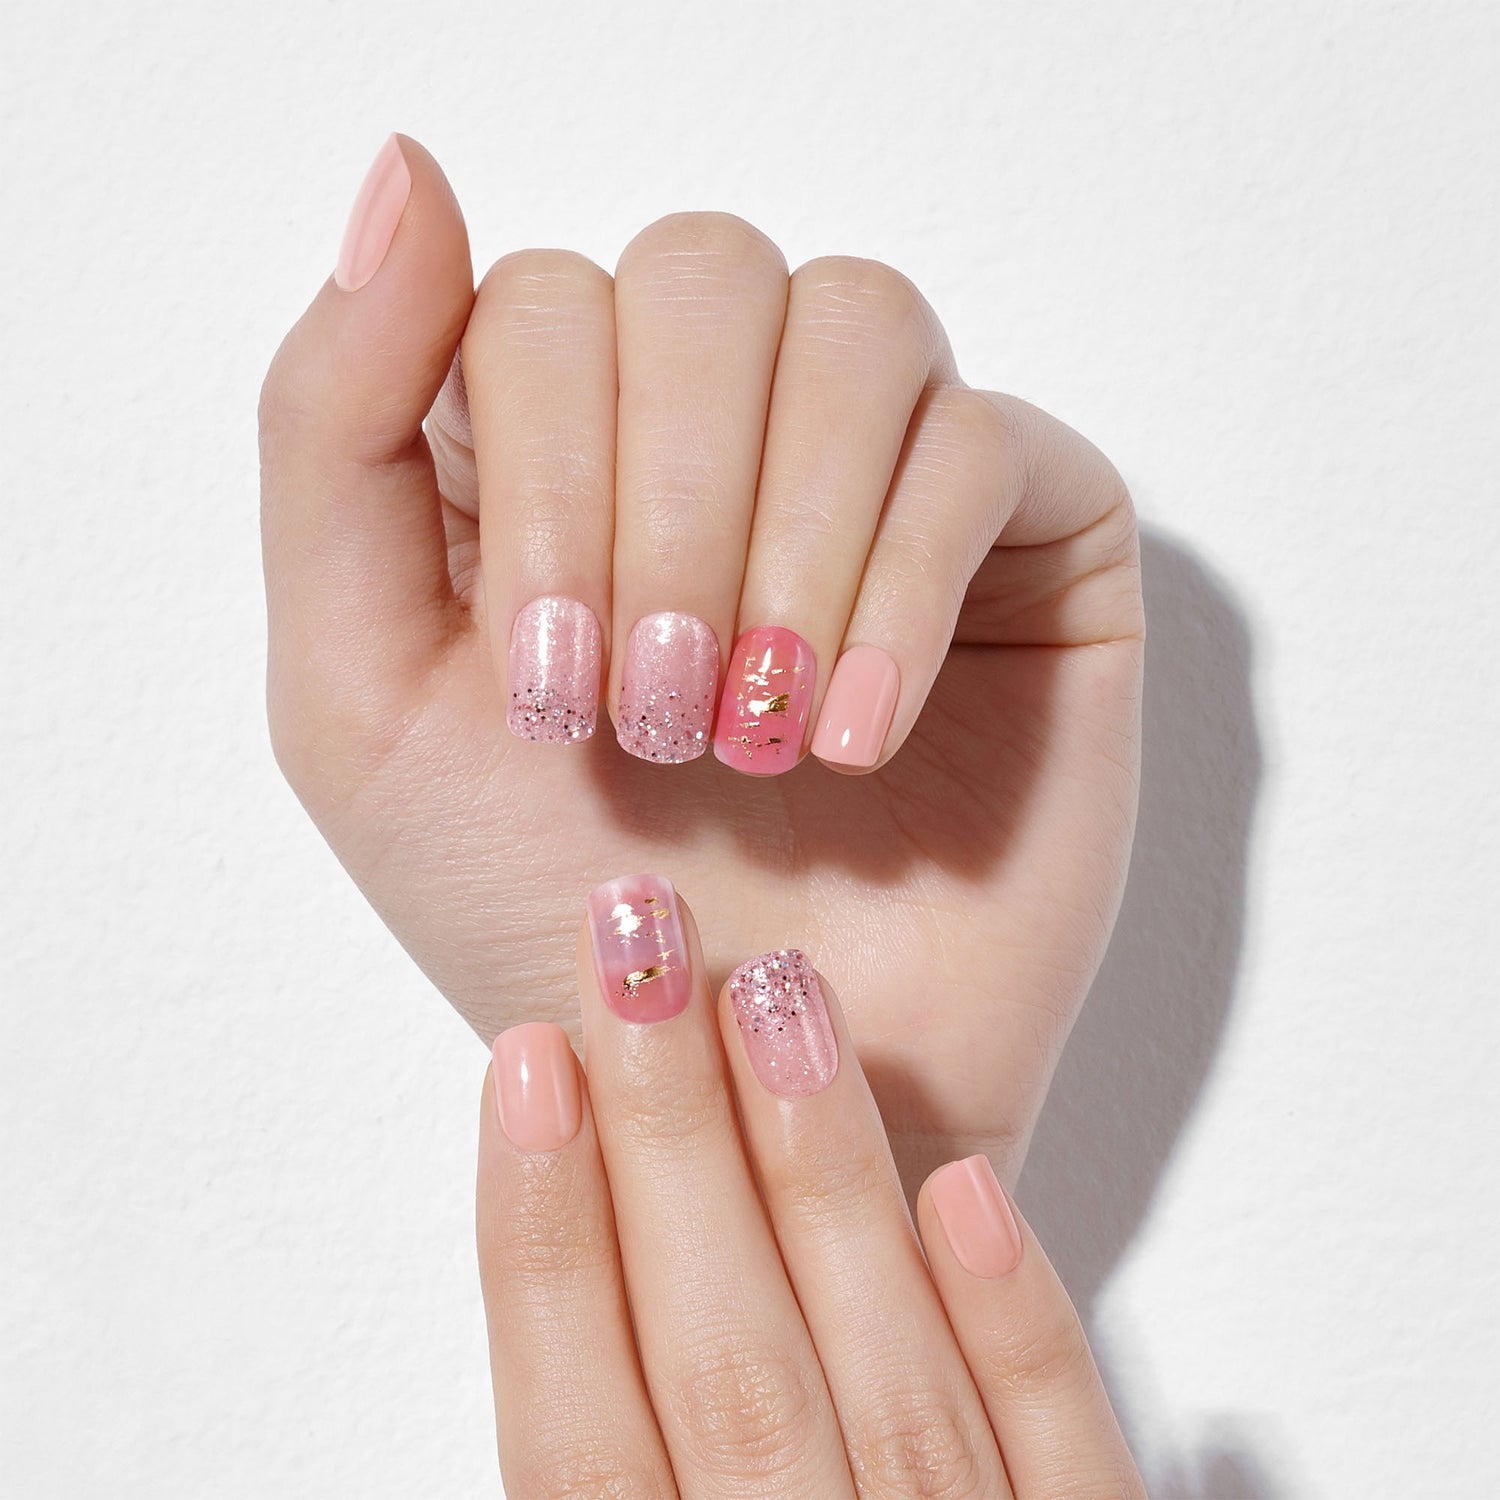 Medium length, square shape, glossy finish pink & nude pink press-on gel nails.